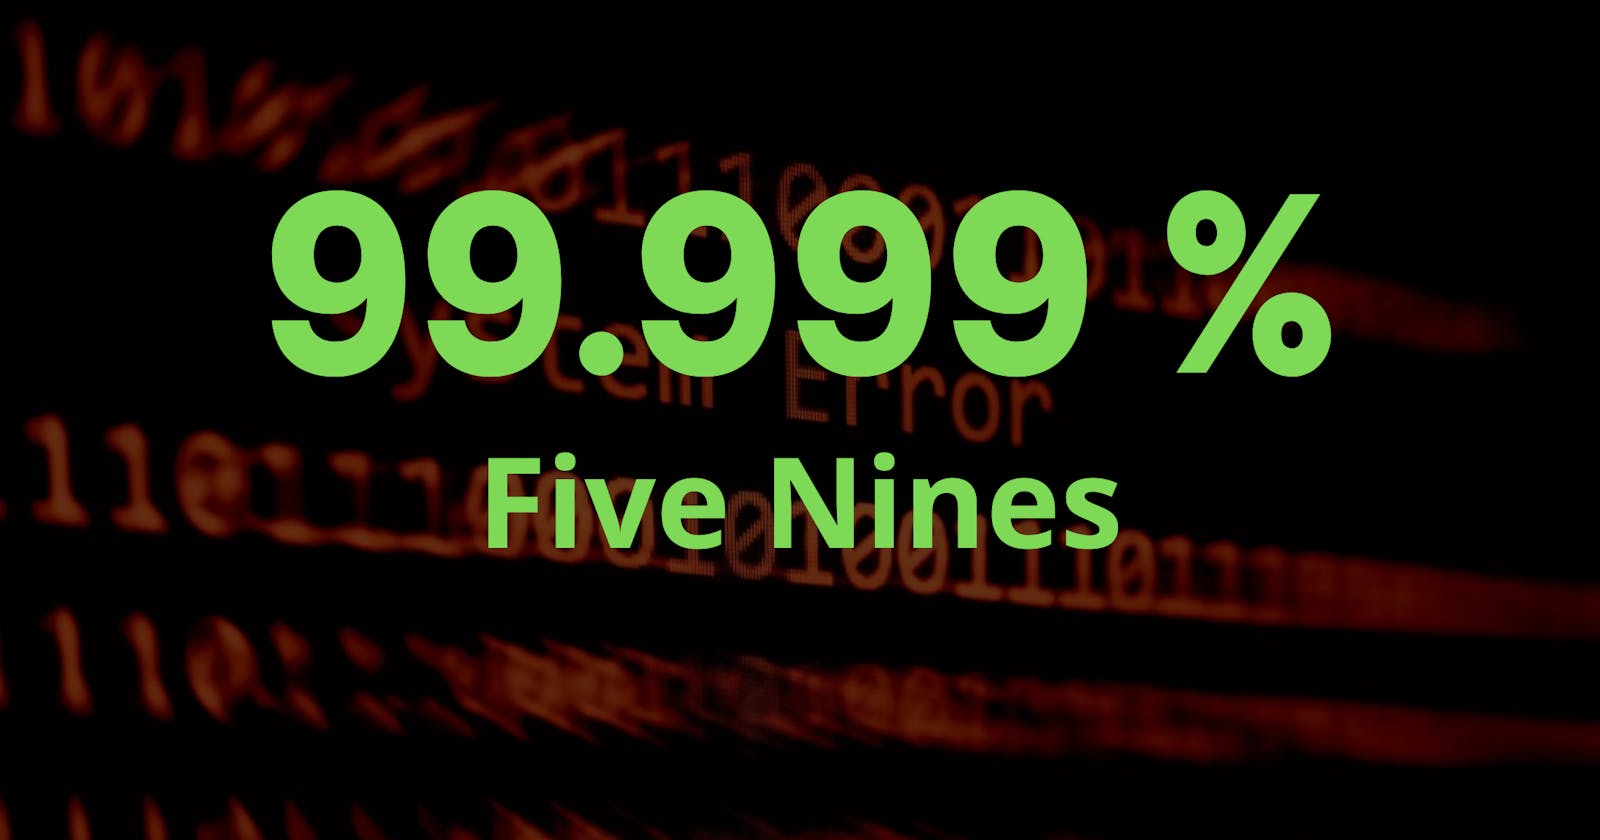 What Does "Five Nines" Mean?